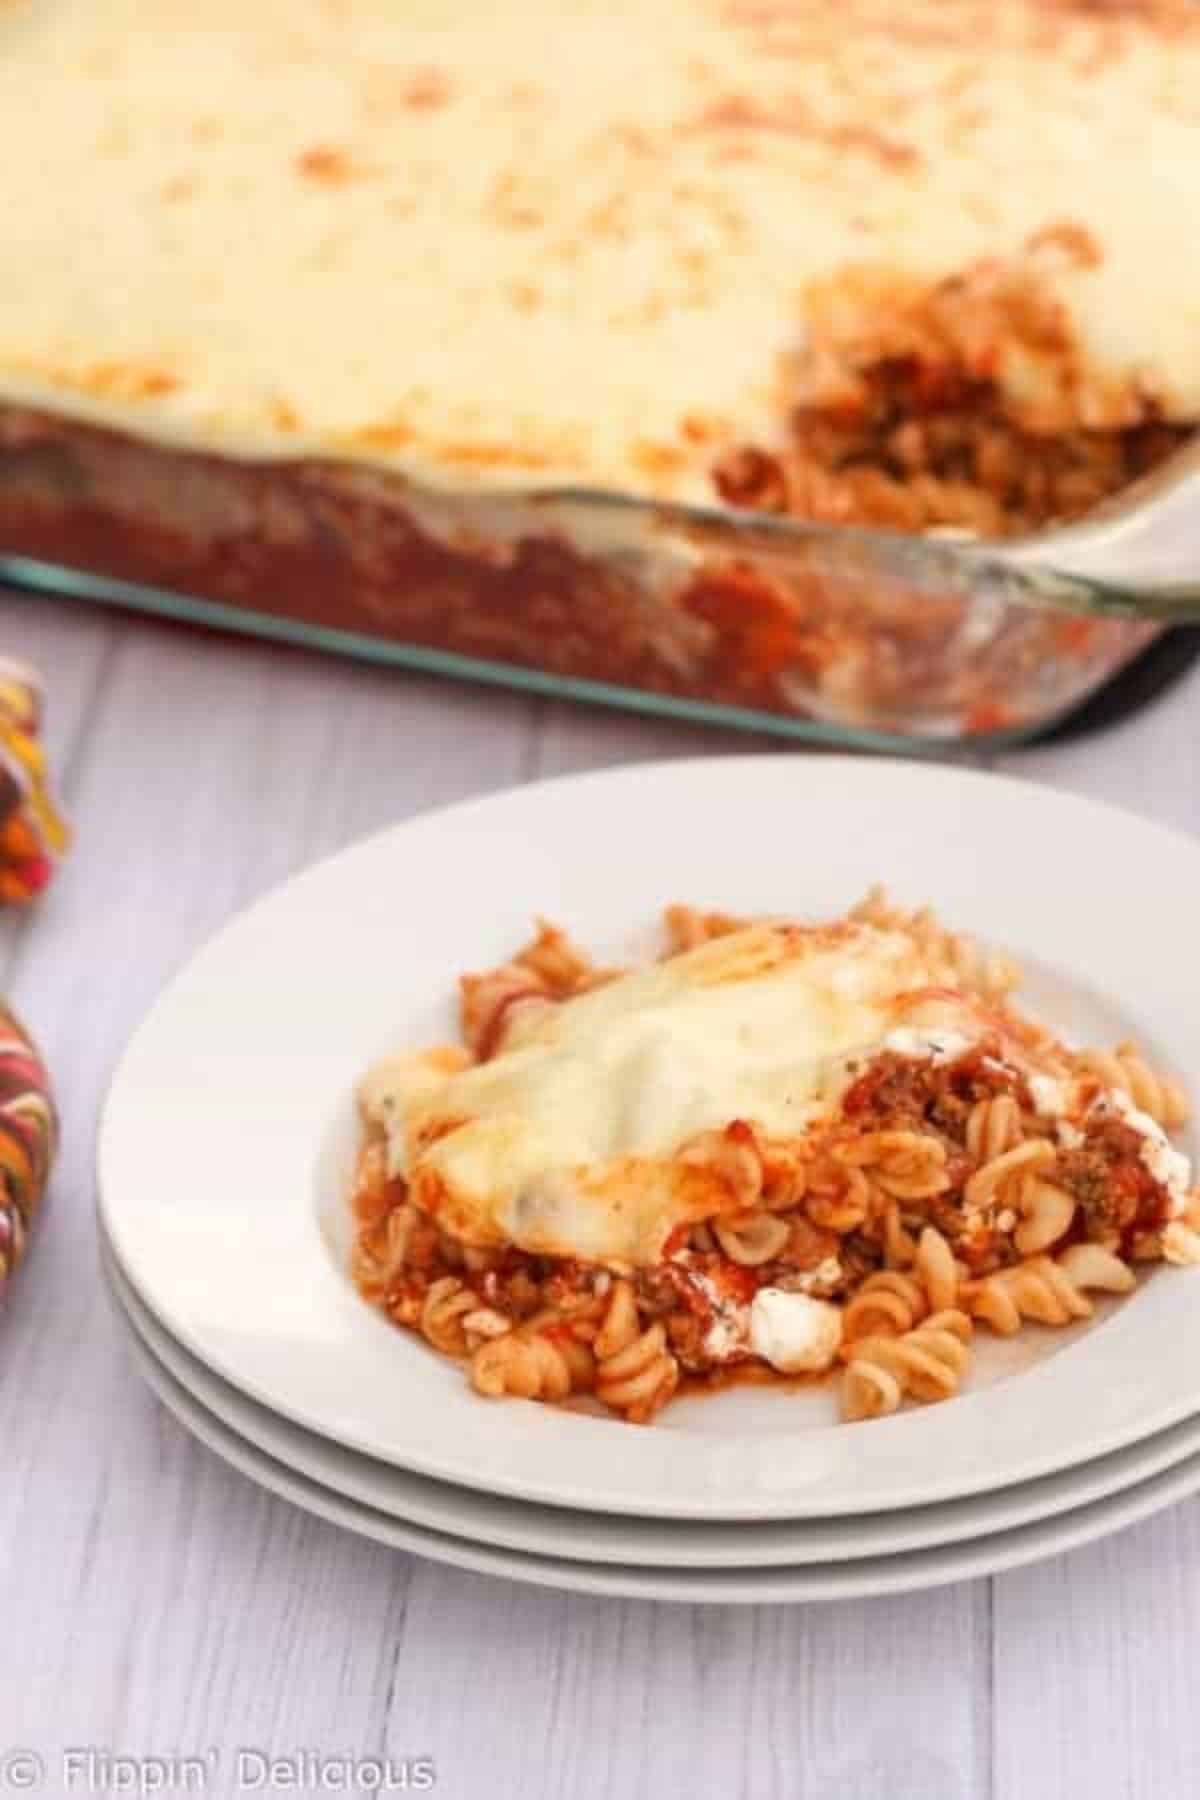 A piece of Gluten-Free Lasagna on a white plate-